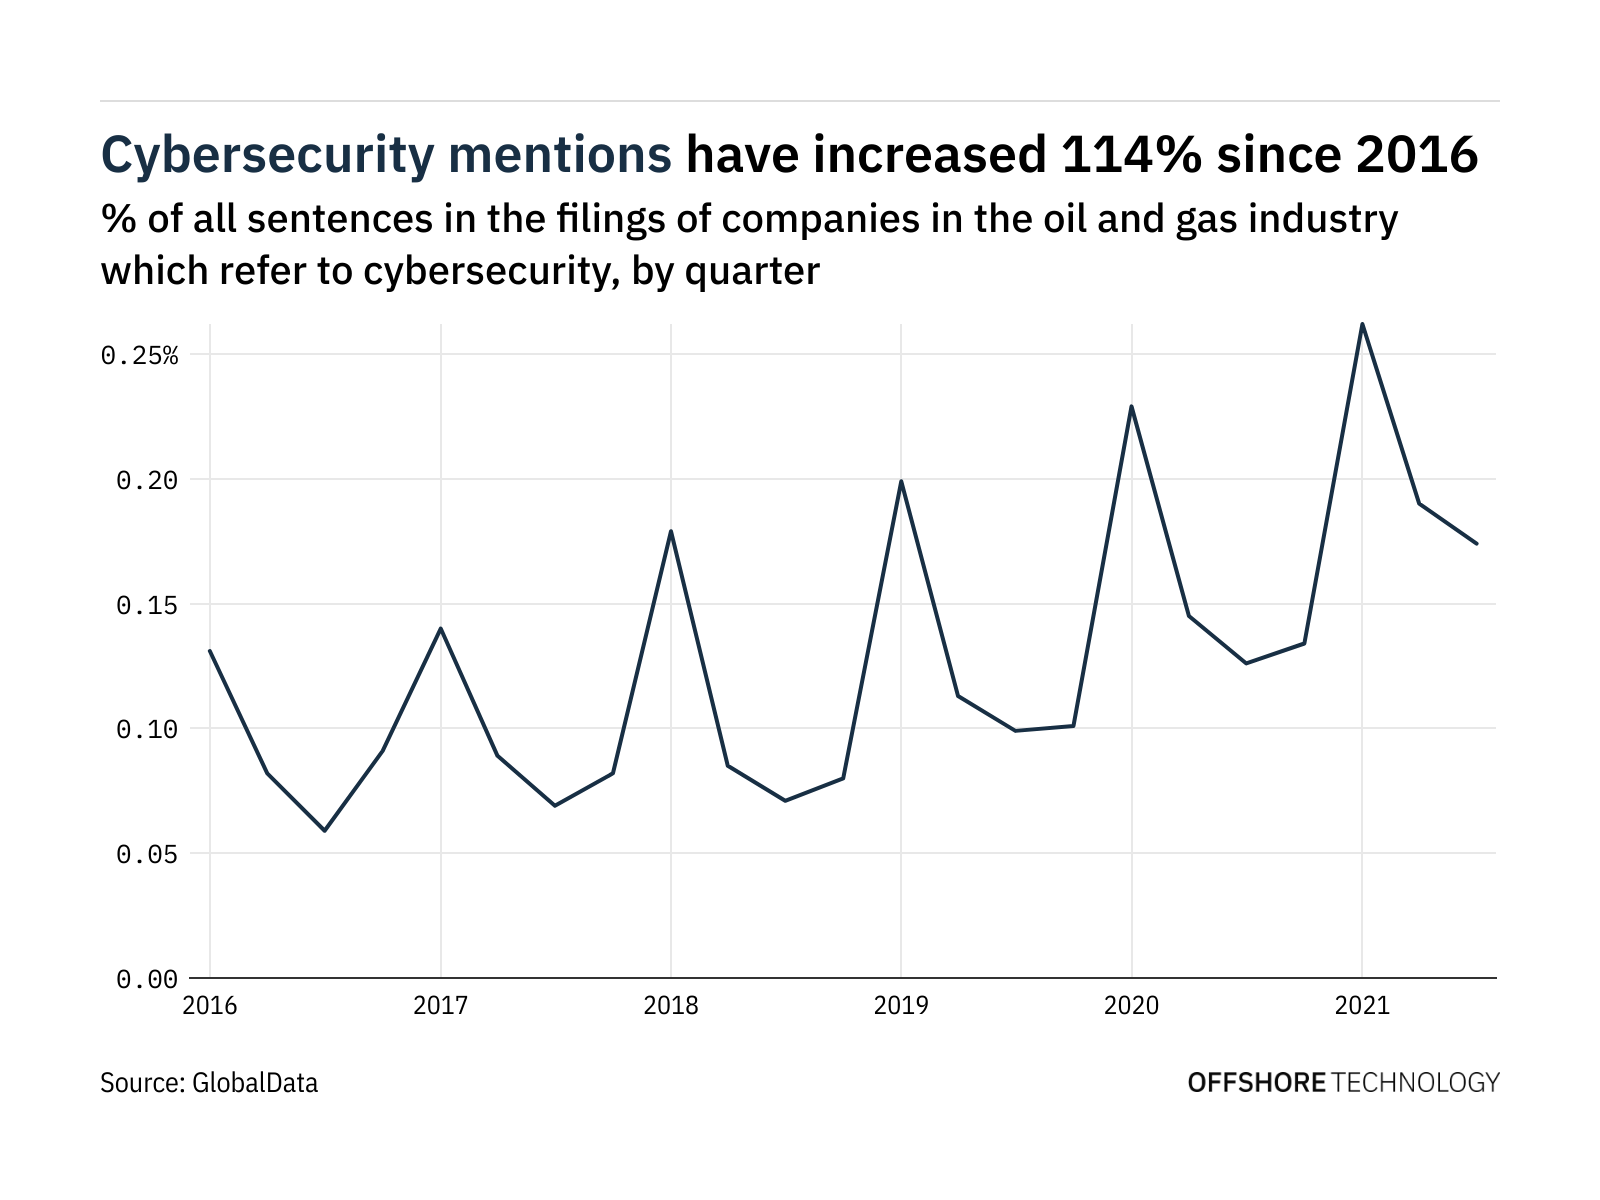 Filings buzz in oil and gas industry: 38% increase in cybersecurity mentions since Q3 of 2020